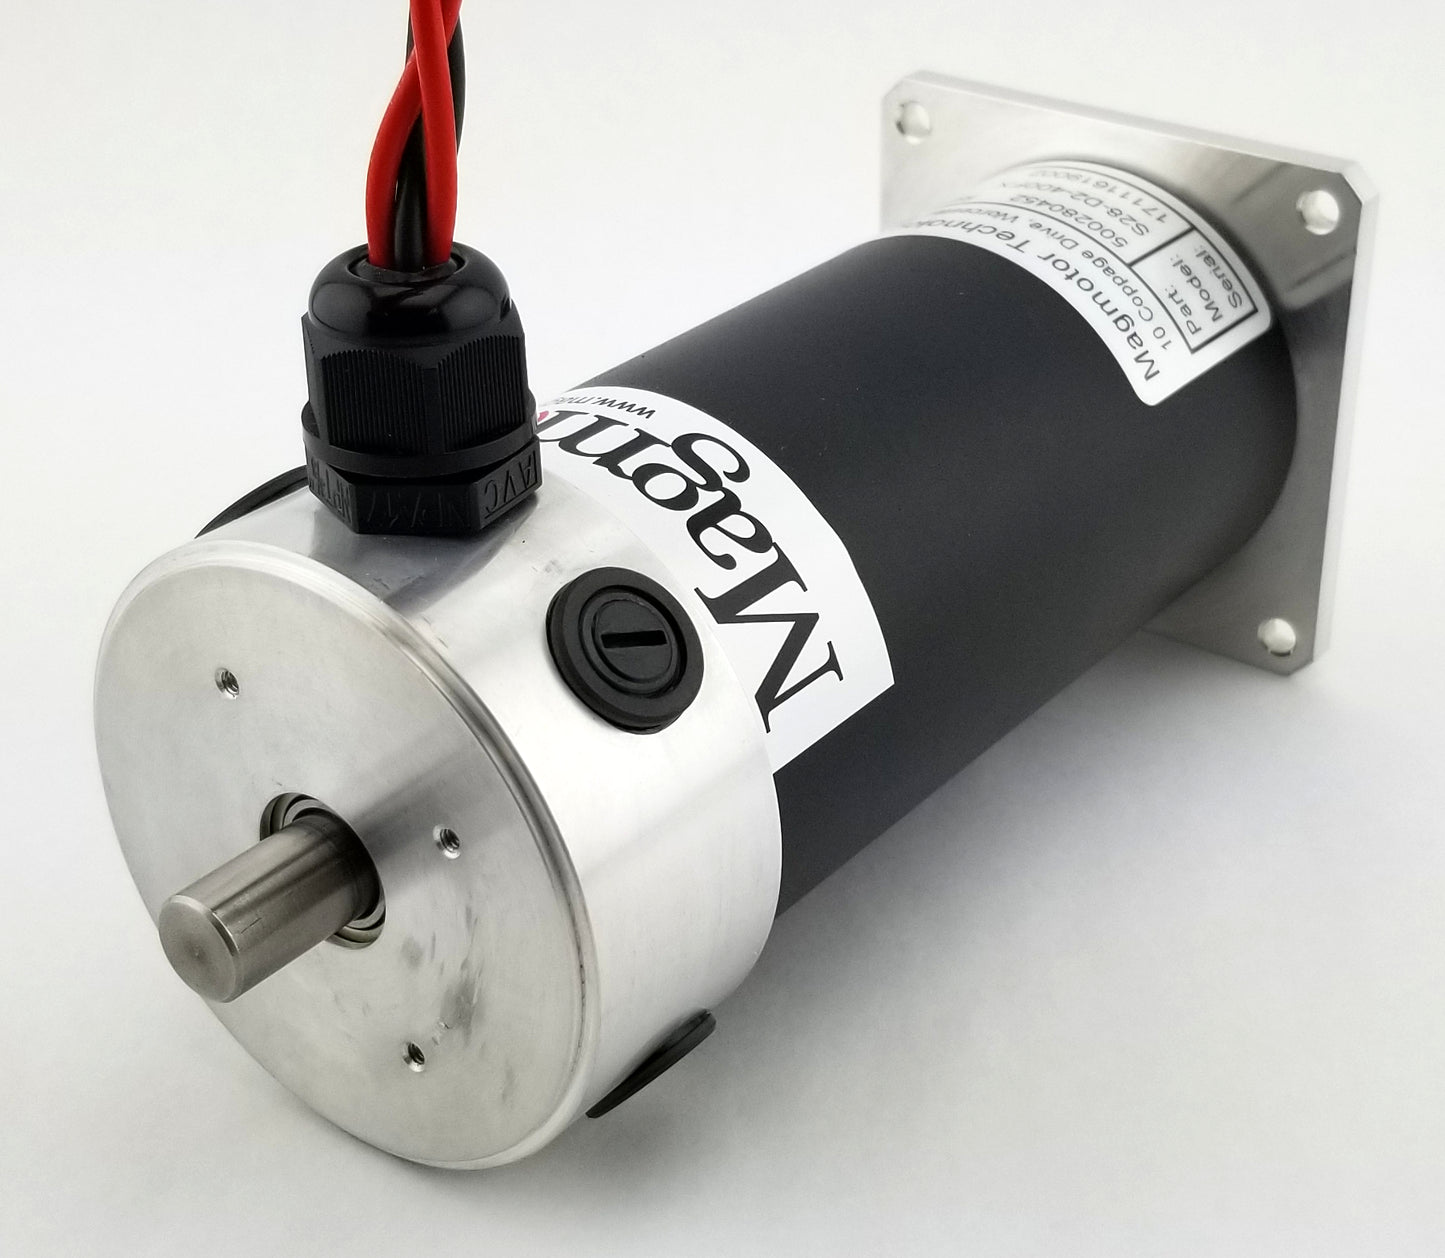 Magmotor S28-D2-400FX 12 to 30 Volt 4 Pole Brushed Motor 500280452 Rear View